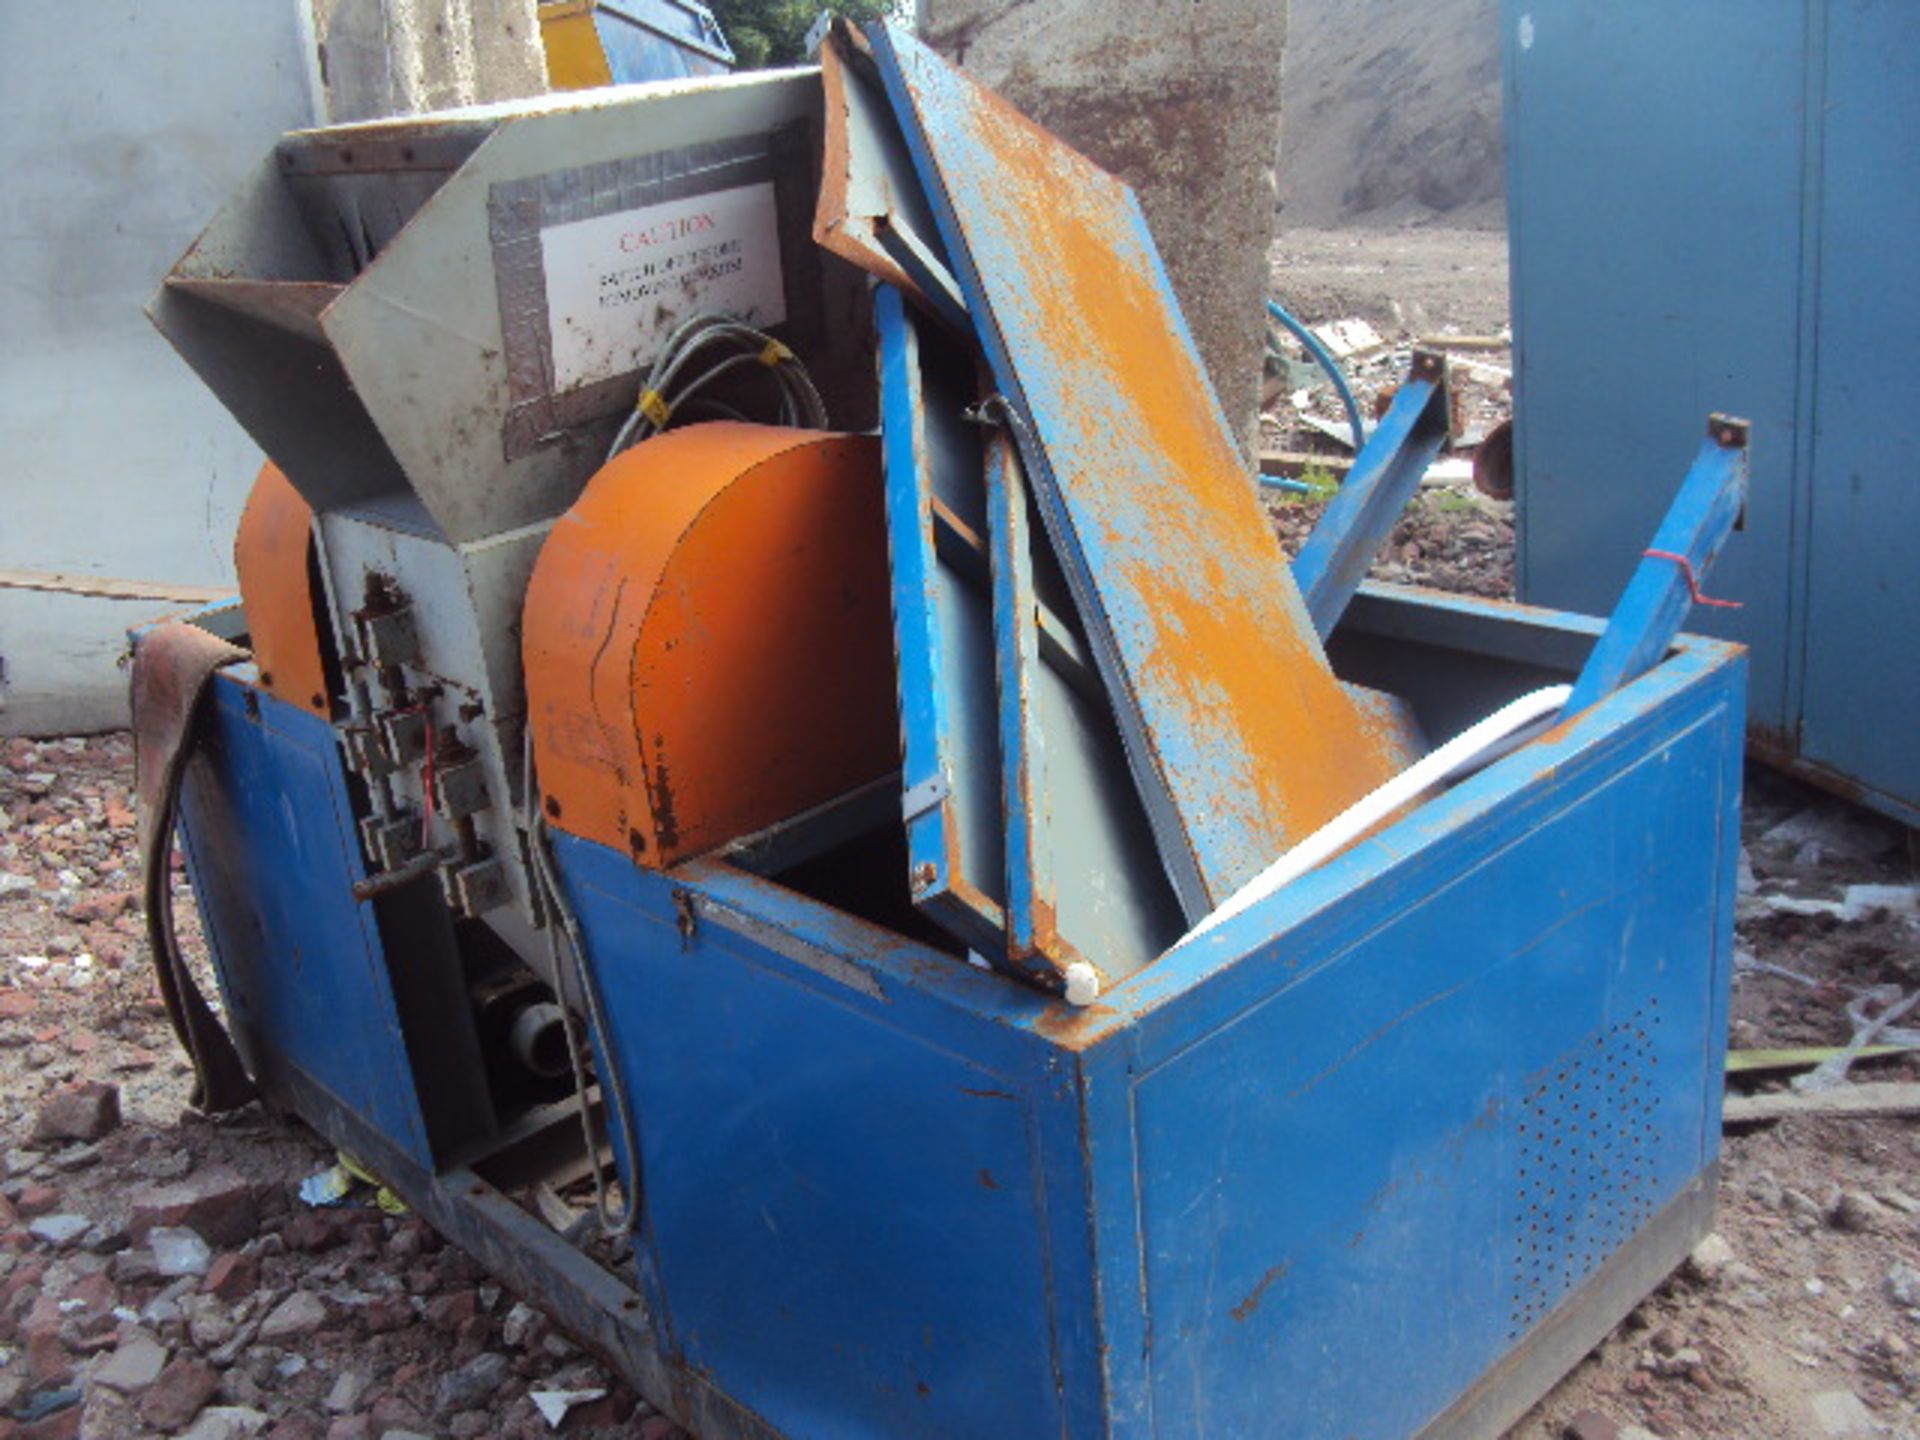 2011 SDR DY60 3-phase copper wire granulator/separator (size 420/520/260CM with twin feed & - Image 4 of 6